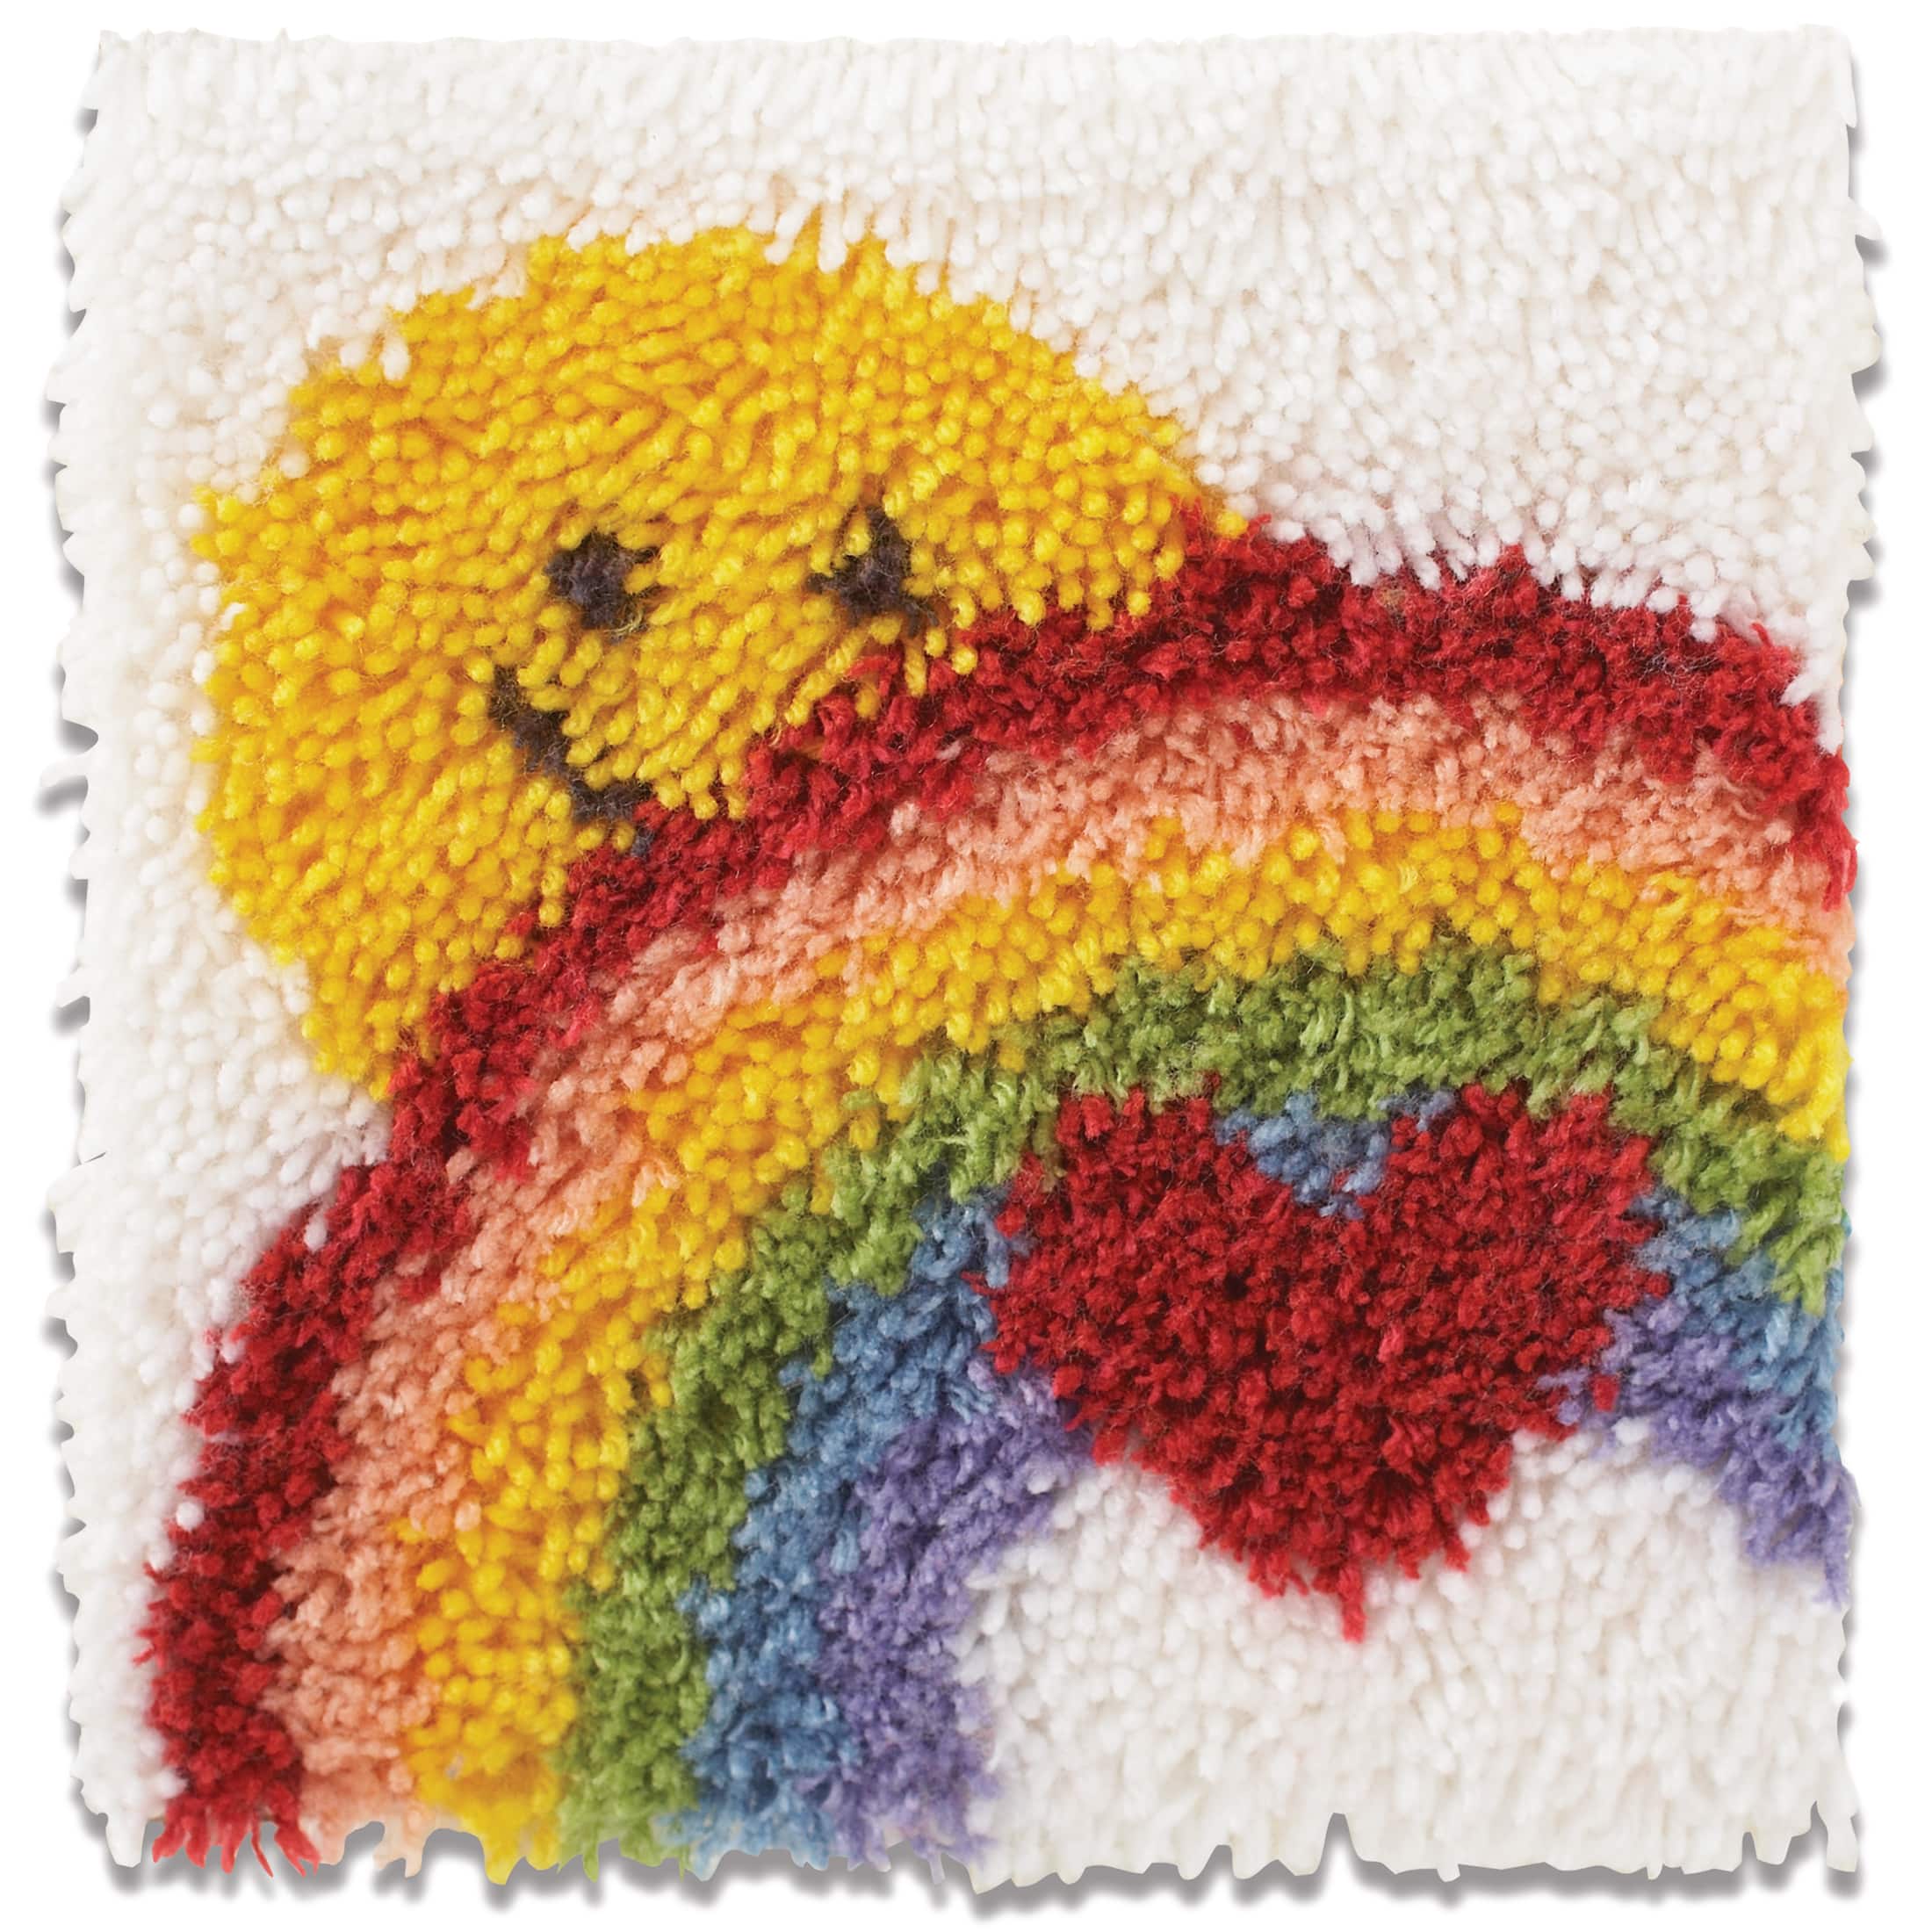 LatchKits Latch Hook Kit for Wall Hangings & Mini-Rugs - Smiling Rainbow -  Craft Kit with Easy, Color-Coded Canvas, Pre-Cut Yarn & Latch Hook Tool 